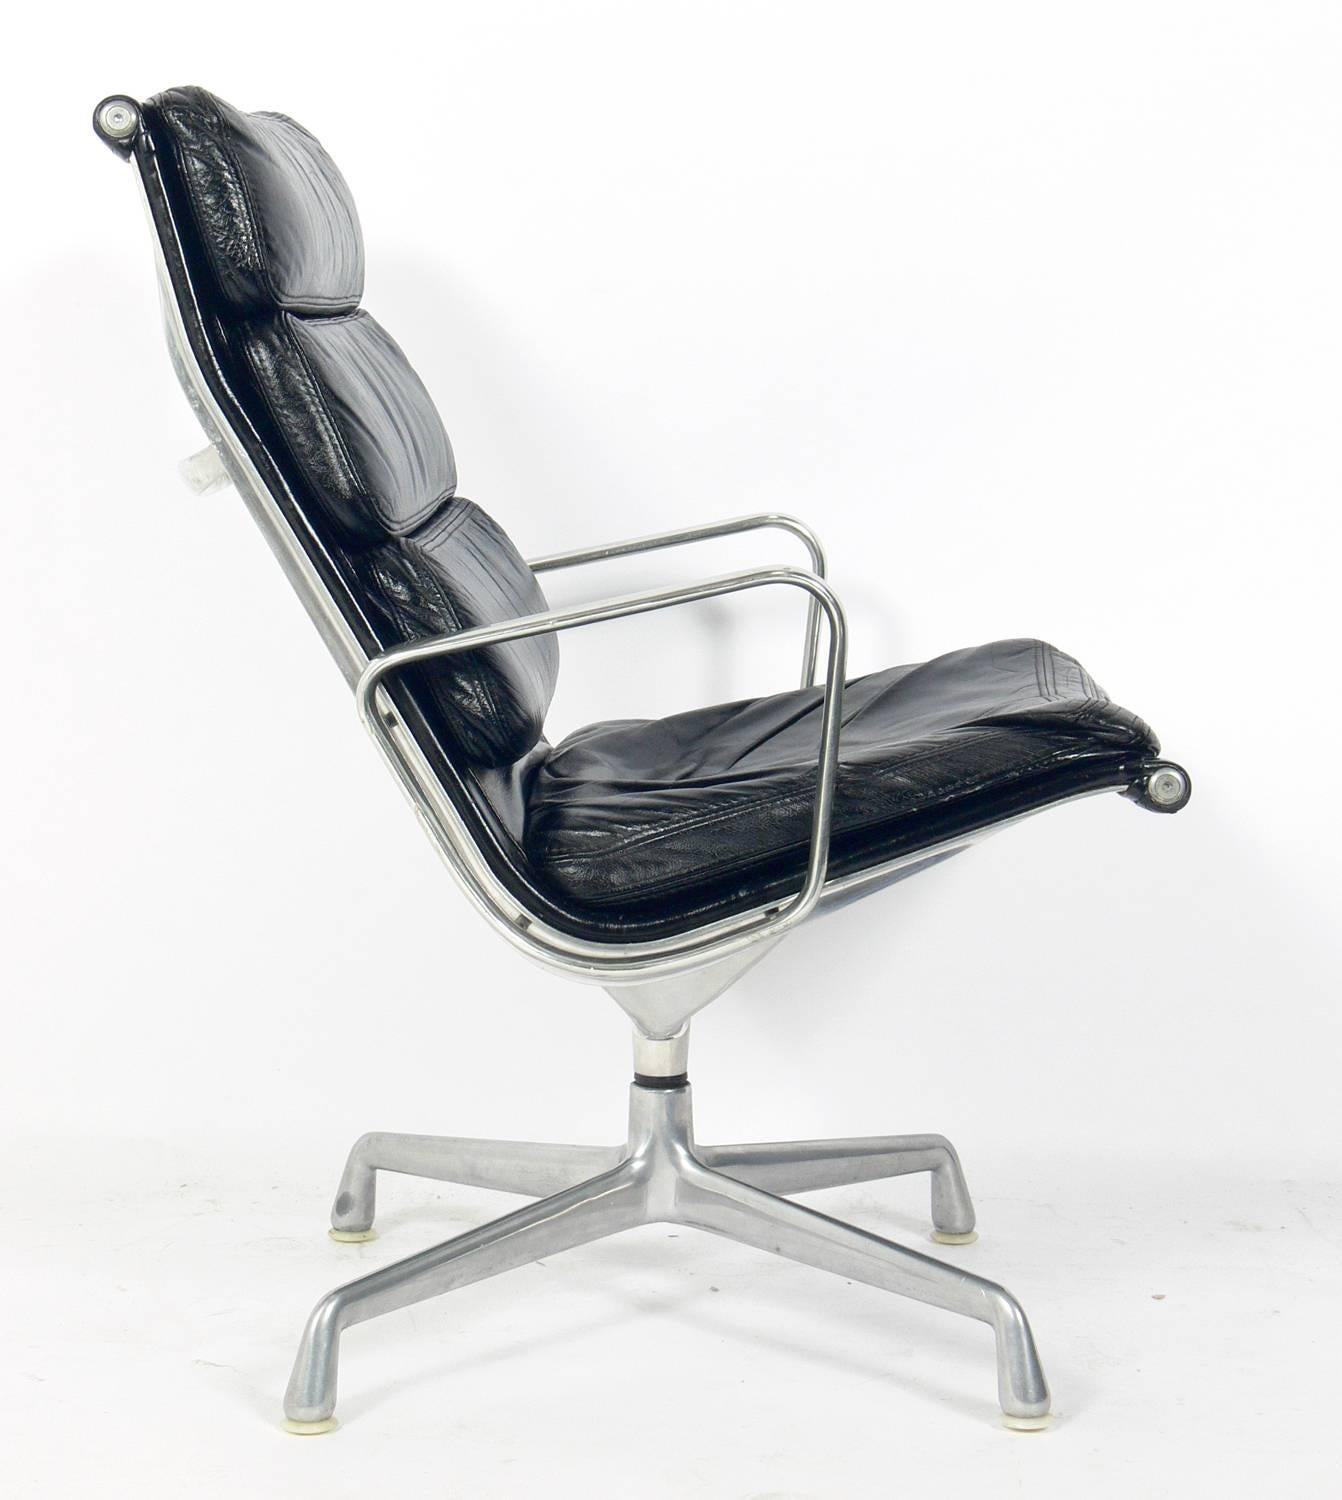 Soft Pad Black Leather Aluminum Group Chair, designed by Charles and Ray Eames for Herman Miller, American, circa 1960s. Impressed signature underneath. Retains warm original patina to the original black leather and the aluminum frame. While